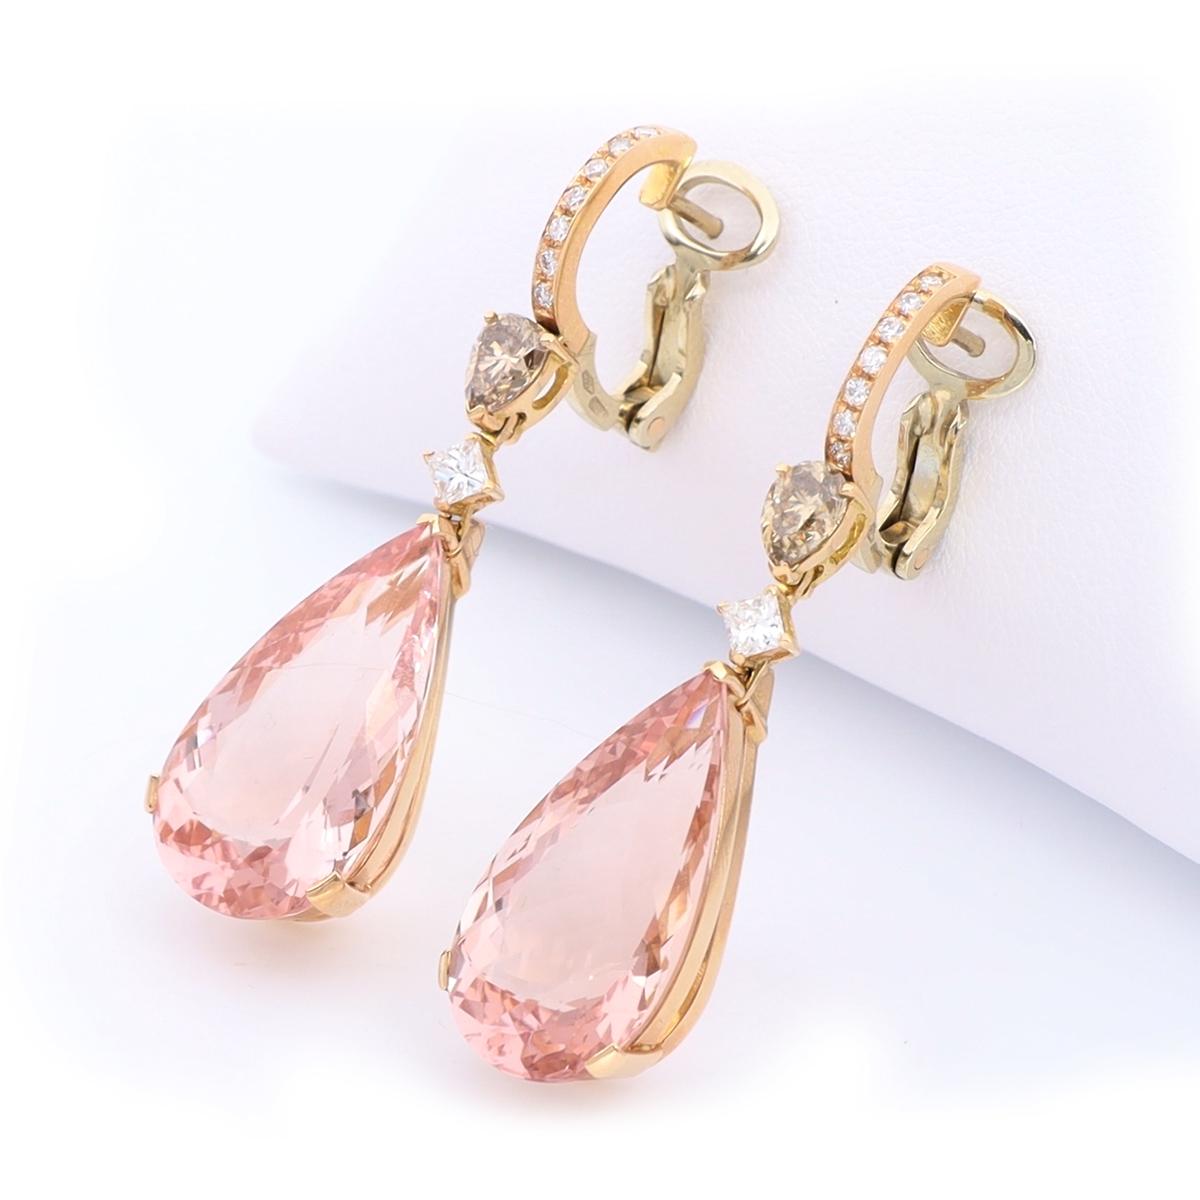 These delicate and feminine drop earrings feature a gorgeous pear-shaped 27.35 ct pink morganite stone suspended from white and brown diamonds. Morganite, the birthstone of June, is said to represent divine love and to gently purify the heart and